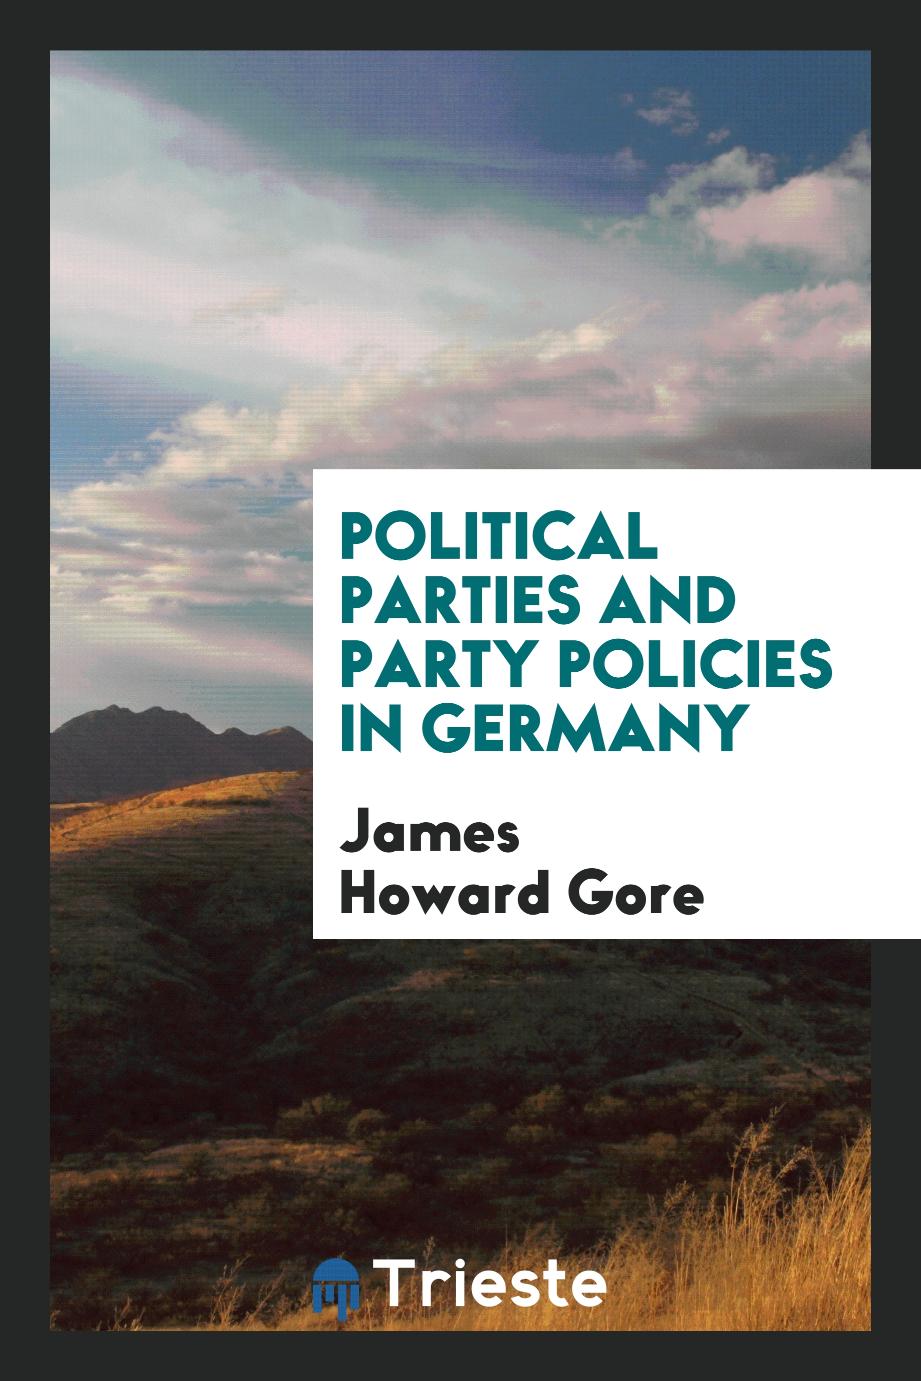 Political parties and party policies in Germany